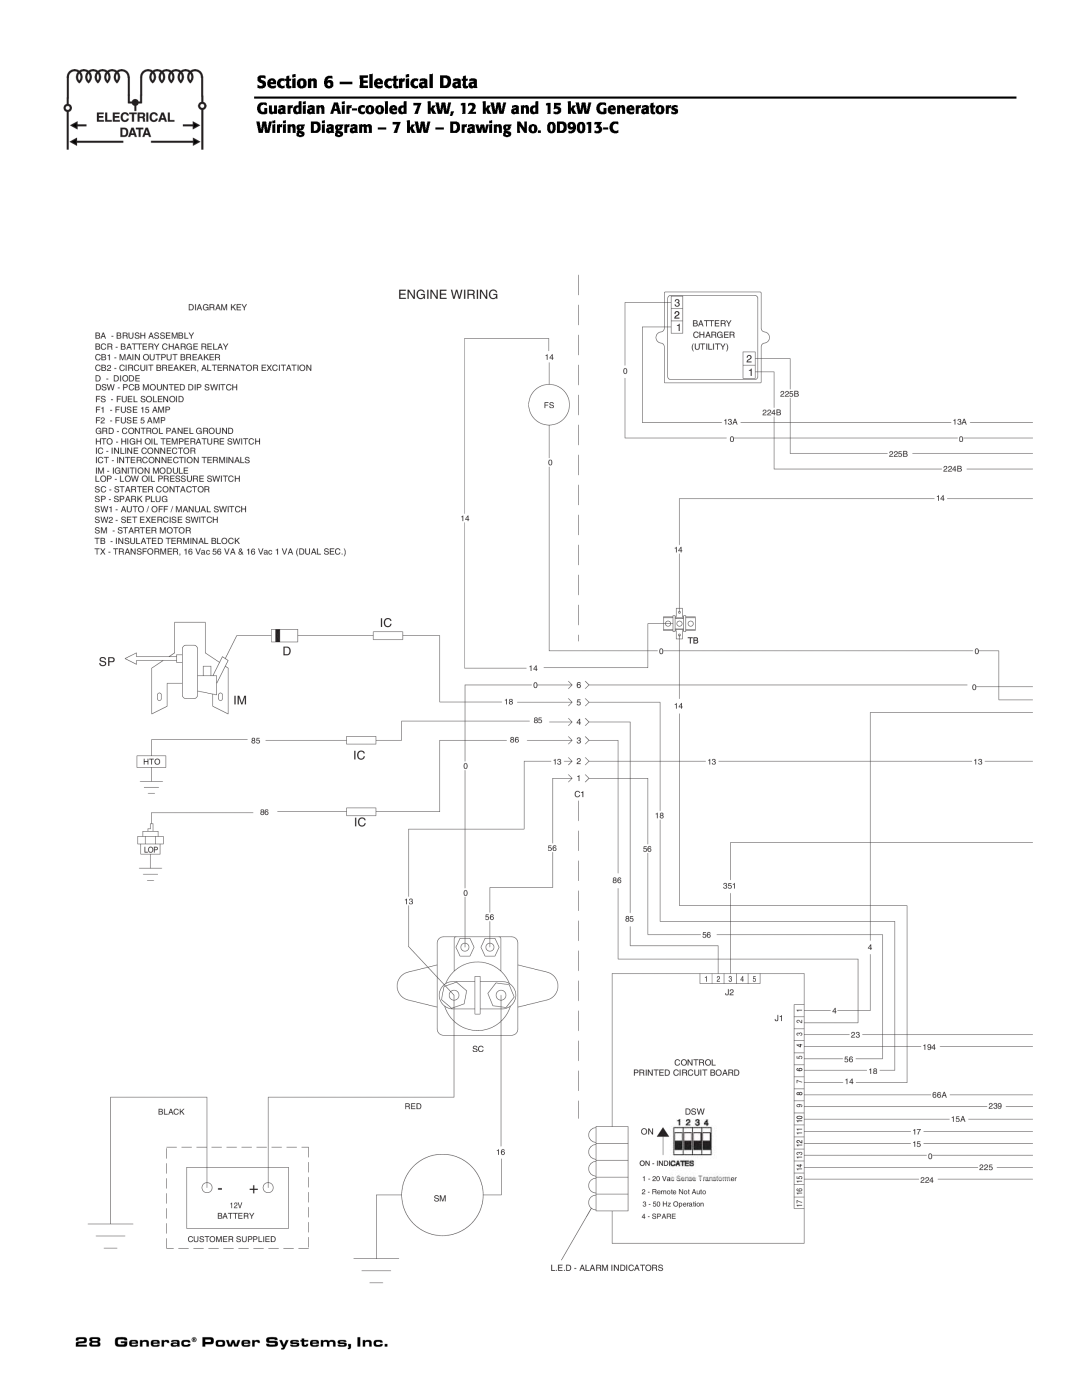 Generac Power Systems 04758-1, 04759-1, 04760-1 owner manual Electrical Data, Generac Power Systems, Inc, Engine Wiring 